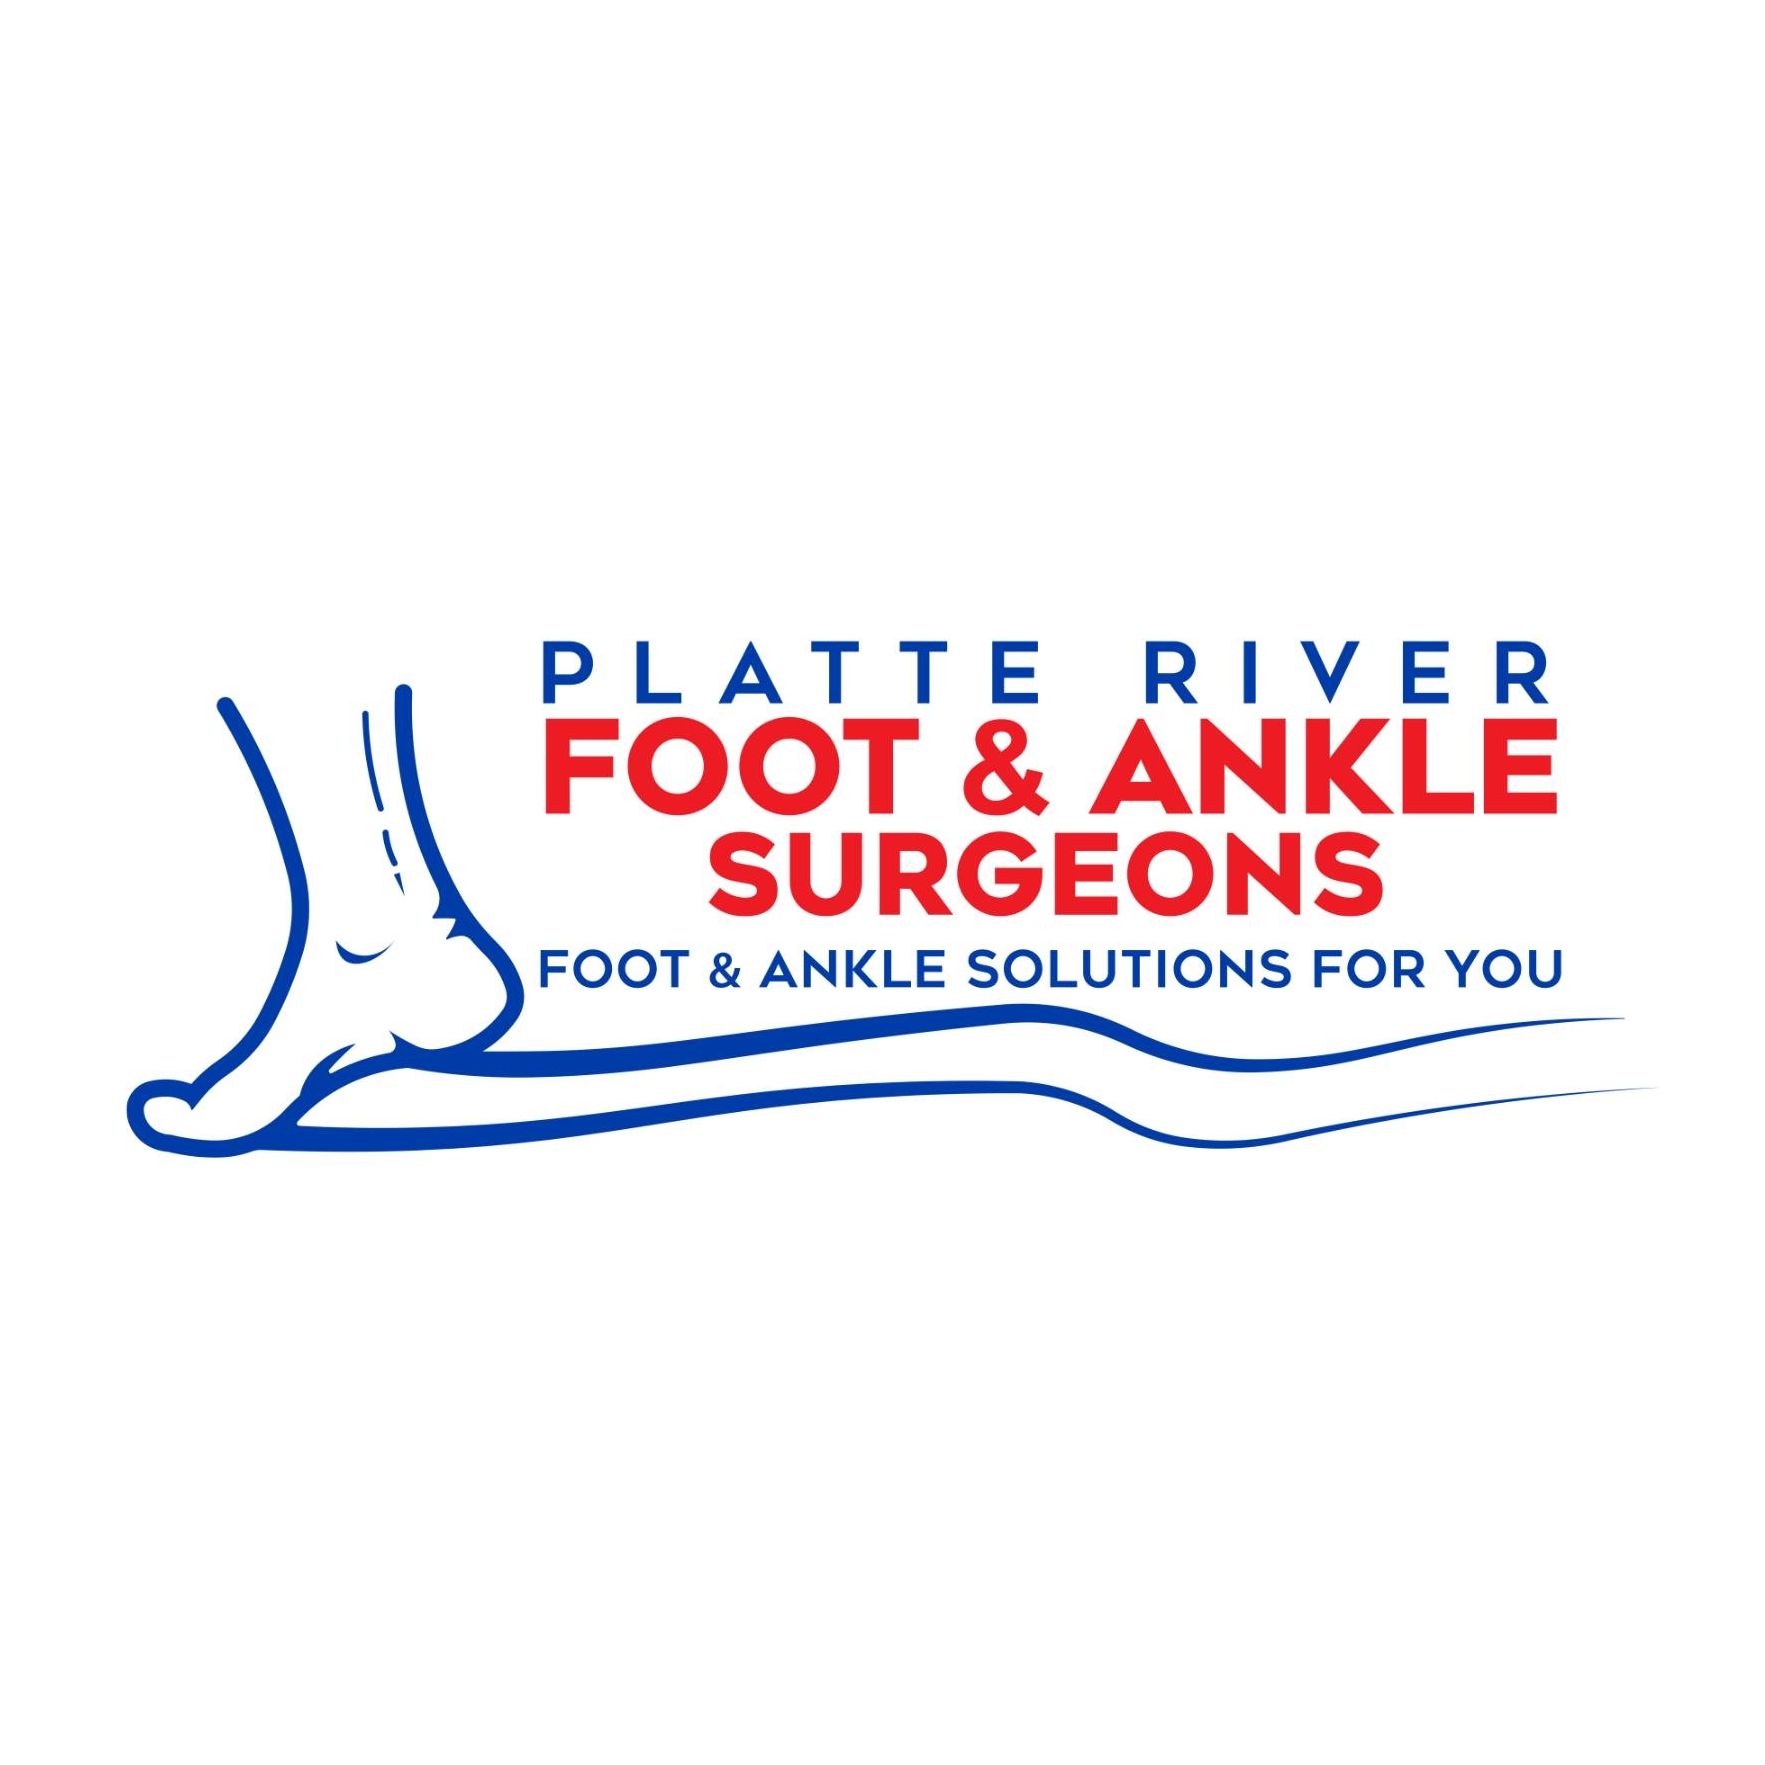 Platte River Foot and Ankle Surgeons